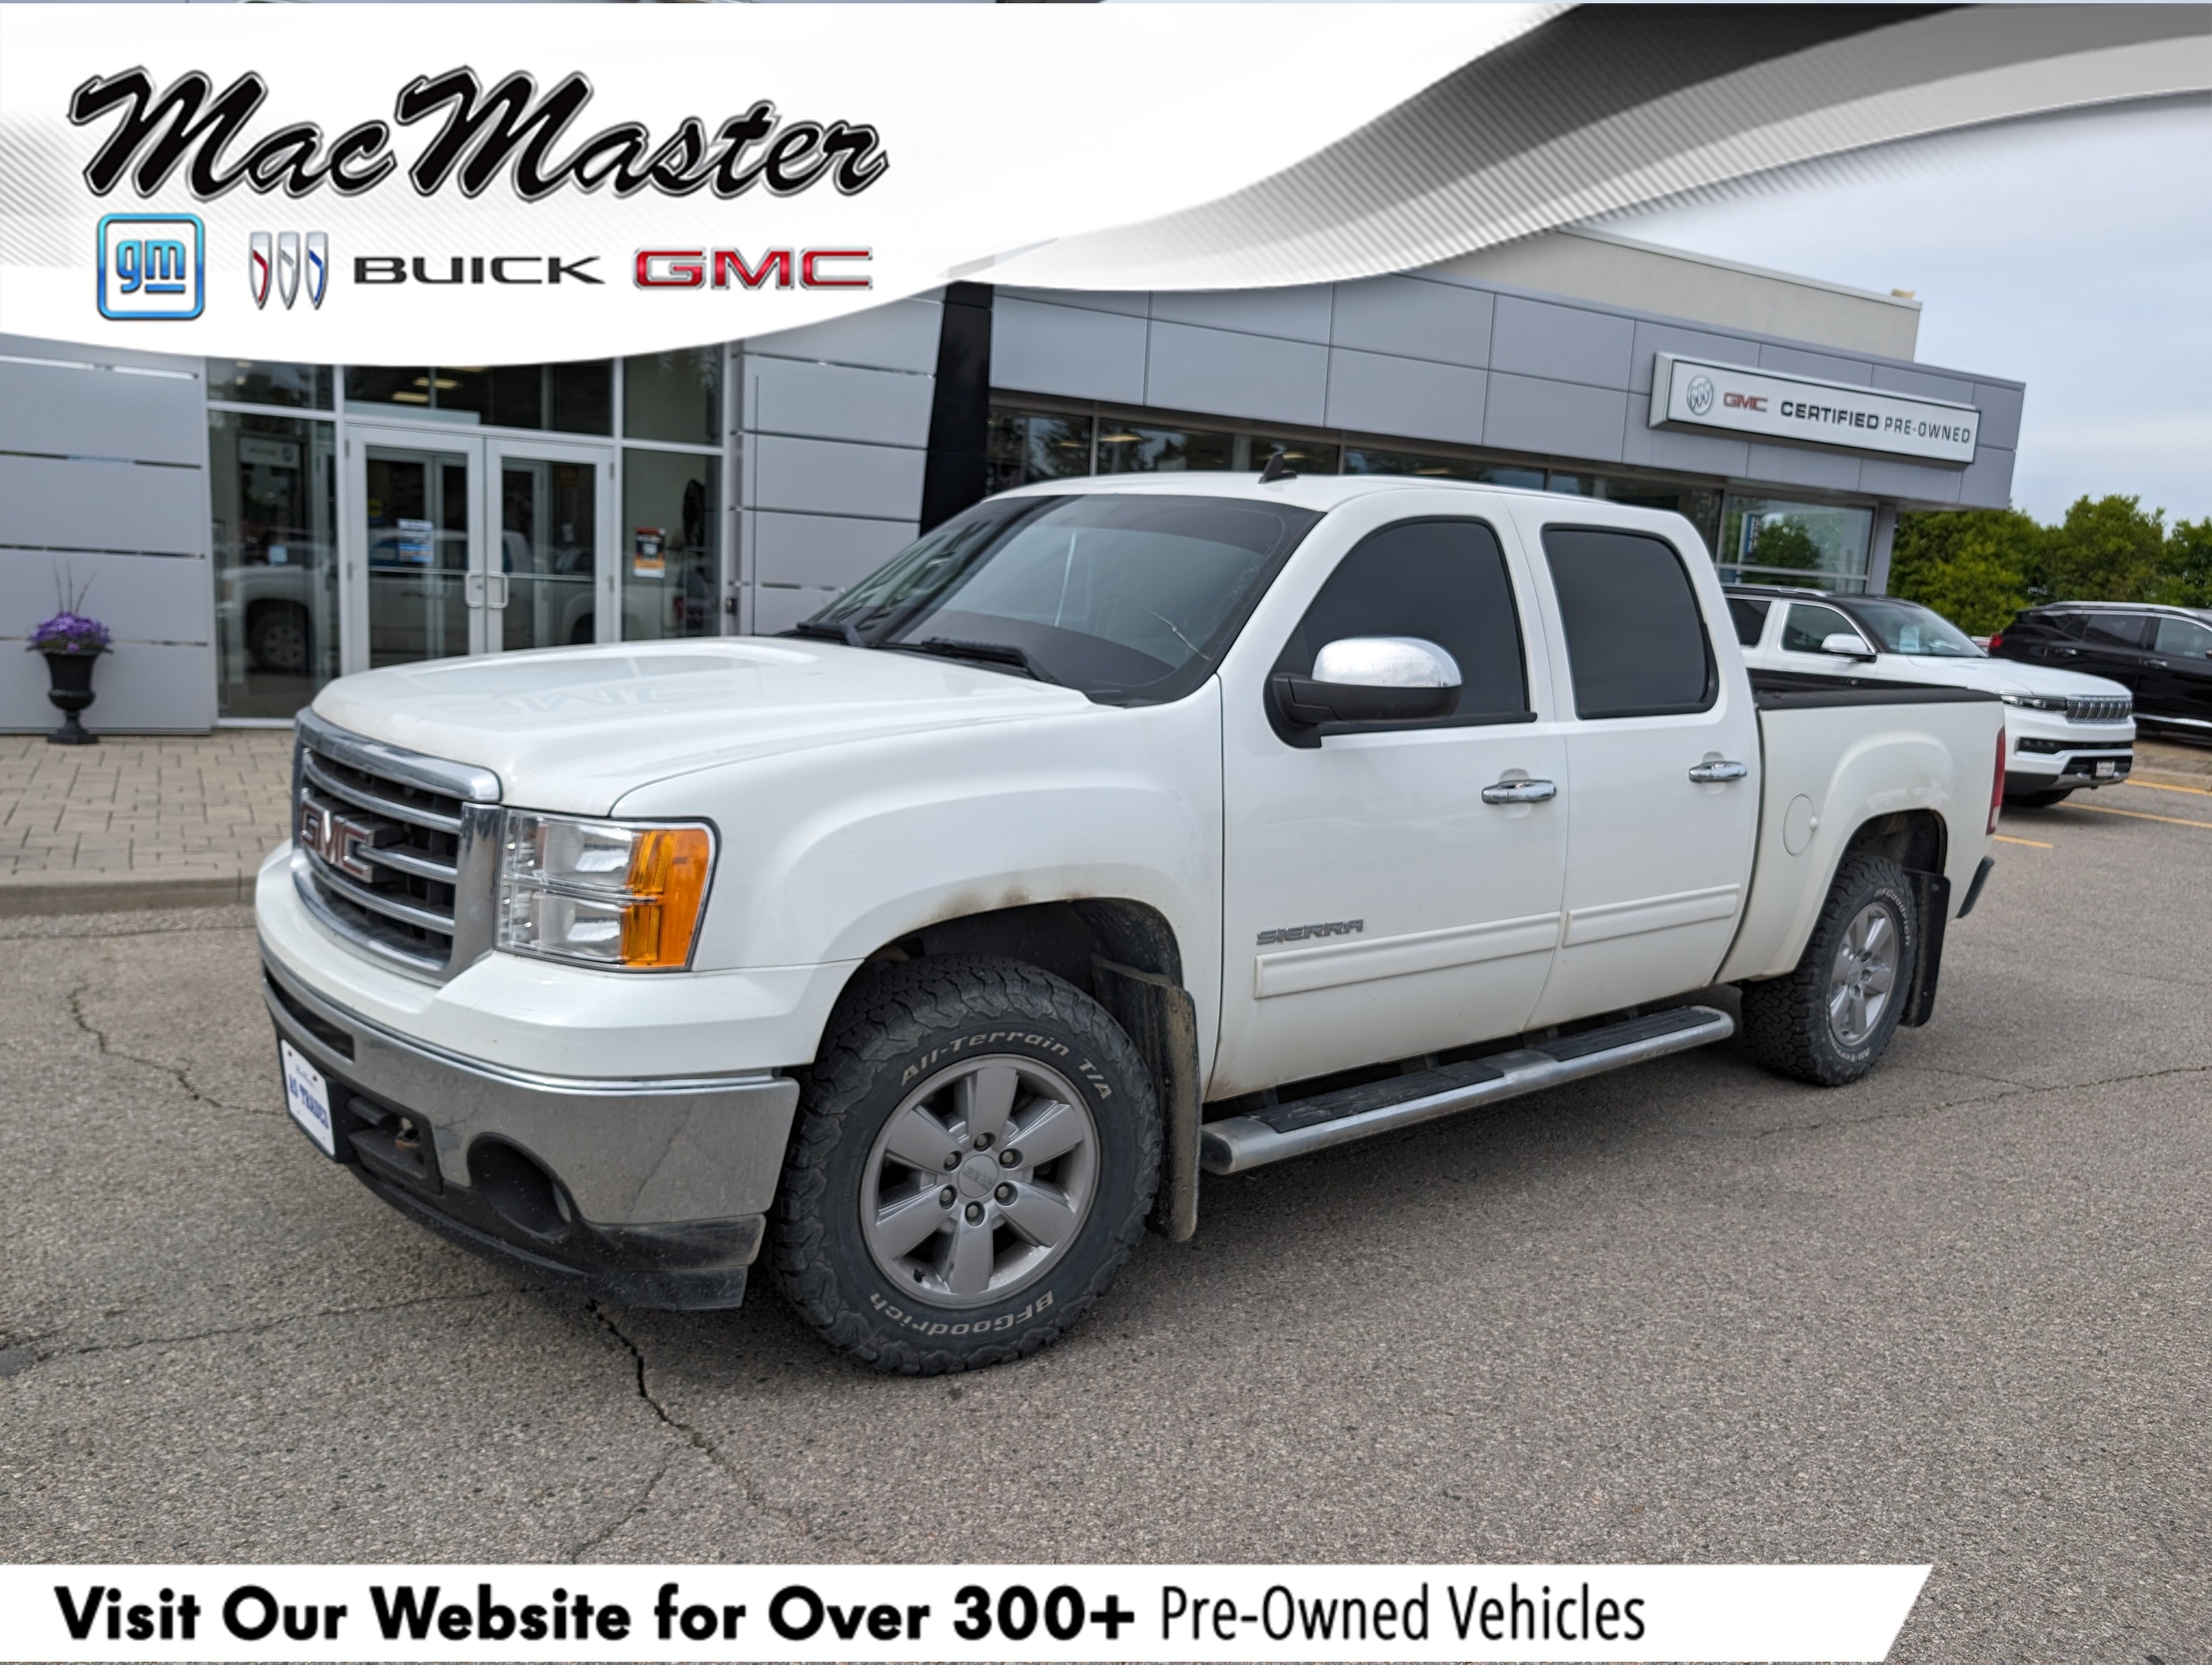 2013 GMC Sierra 1500 SLT, CREW, 4X4, Z71, HTD LEATHER, ROOF, AS-TRADED!